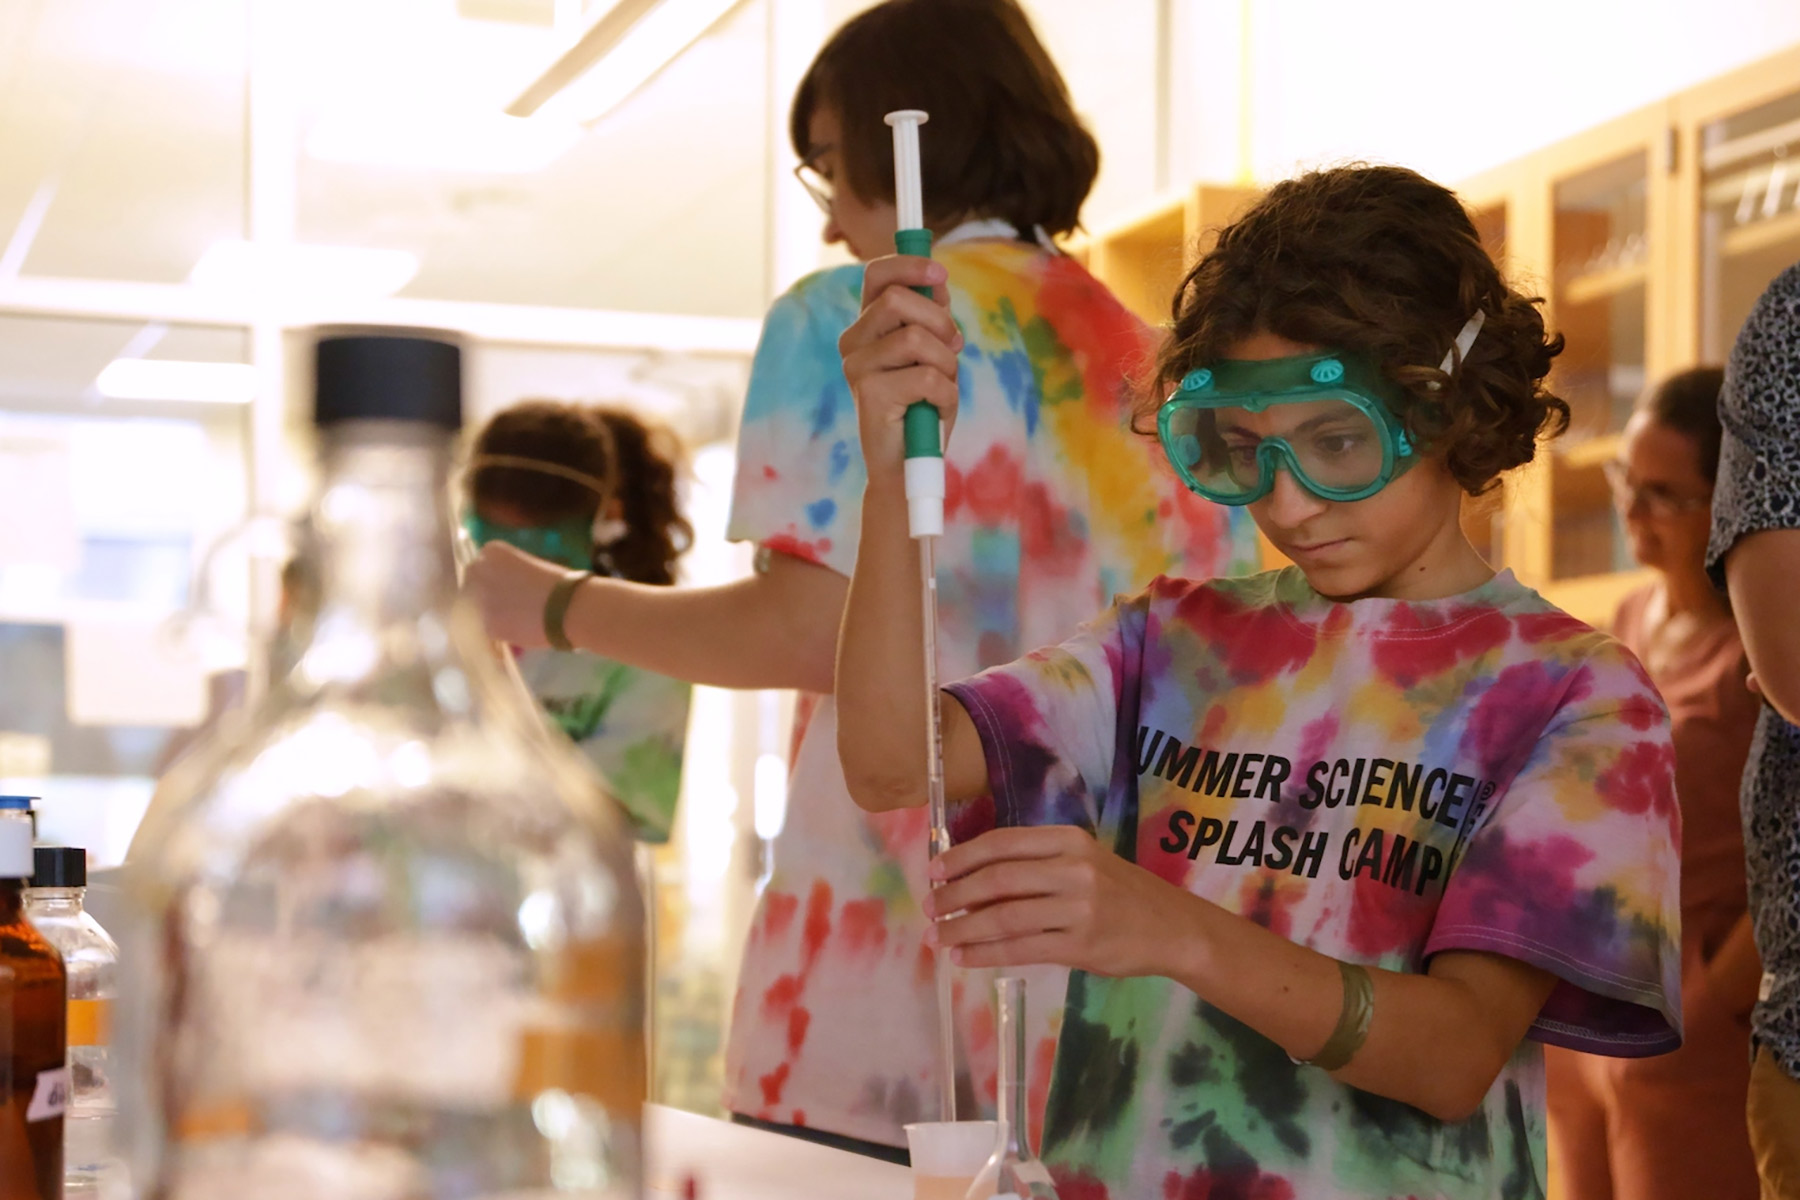 Eckerd College Summer Science Splash Camp receives $22K grant to support STEM education for disadvantaged students